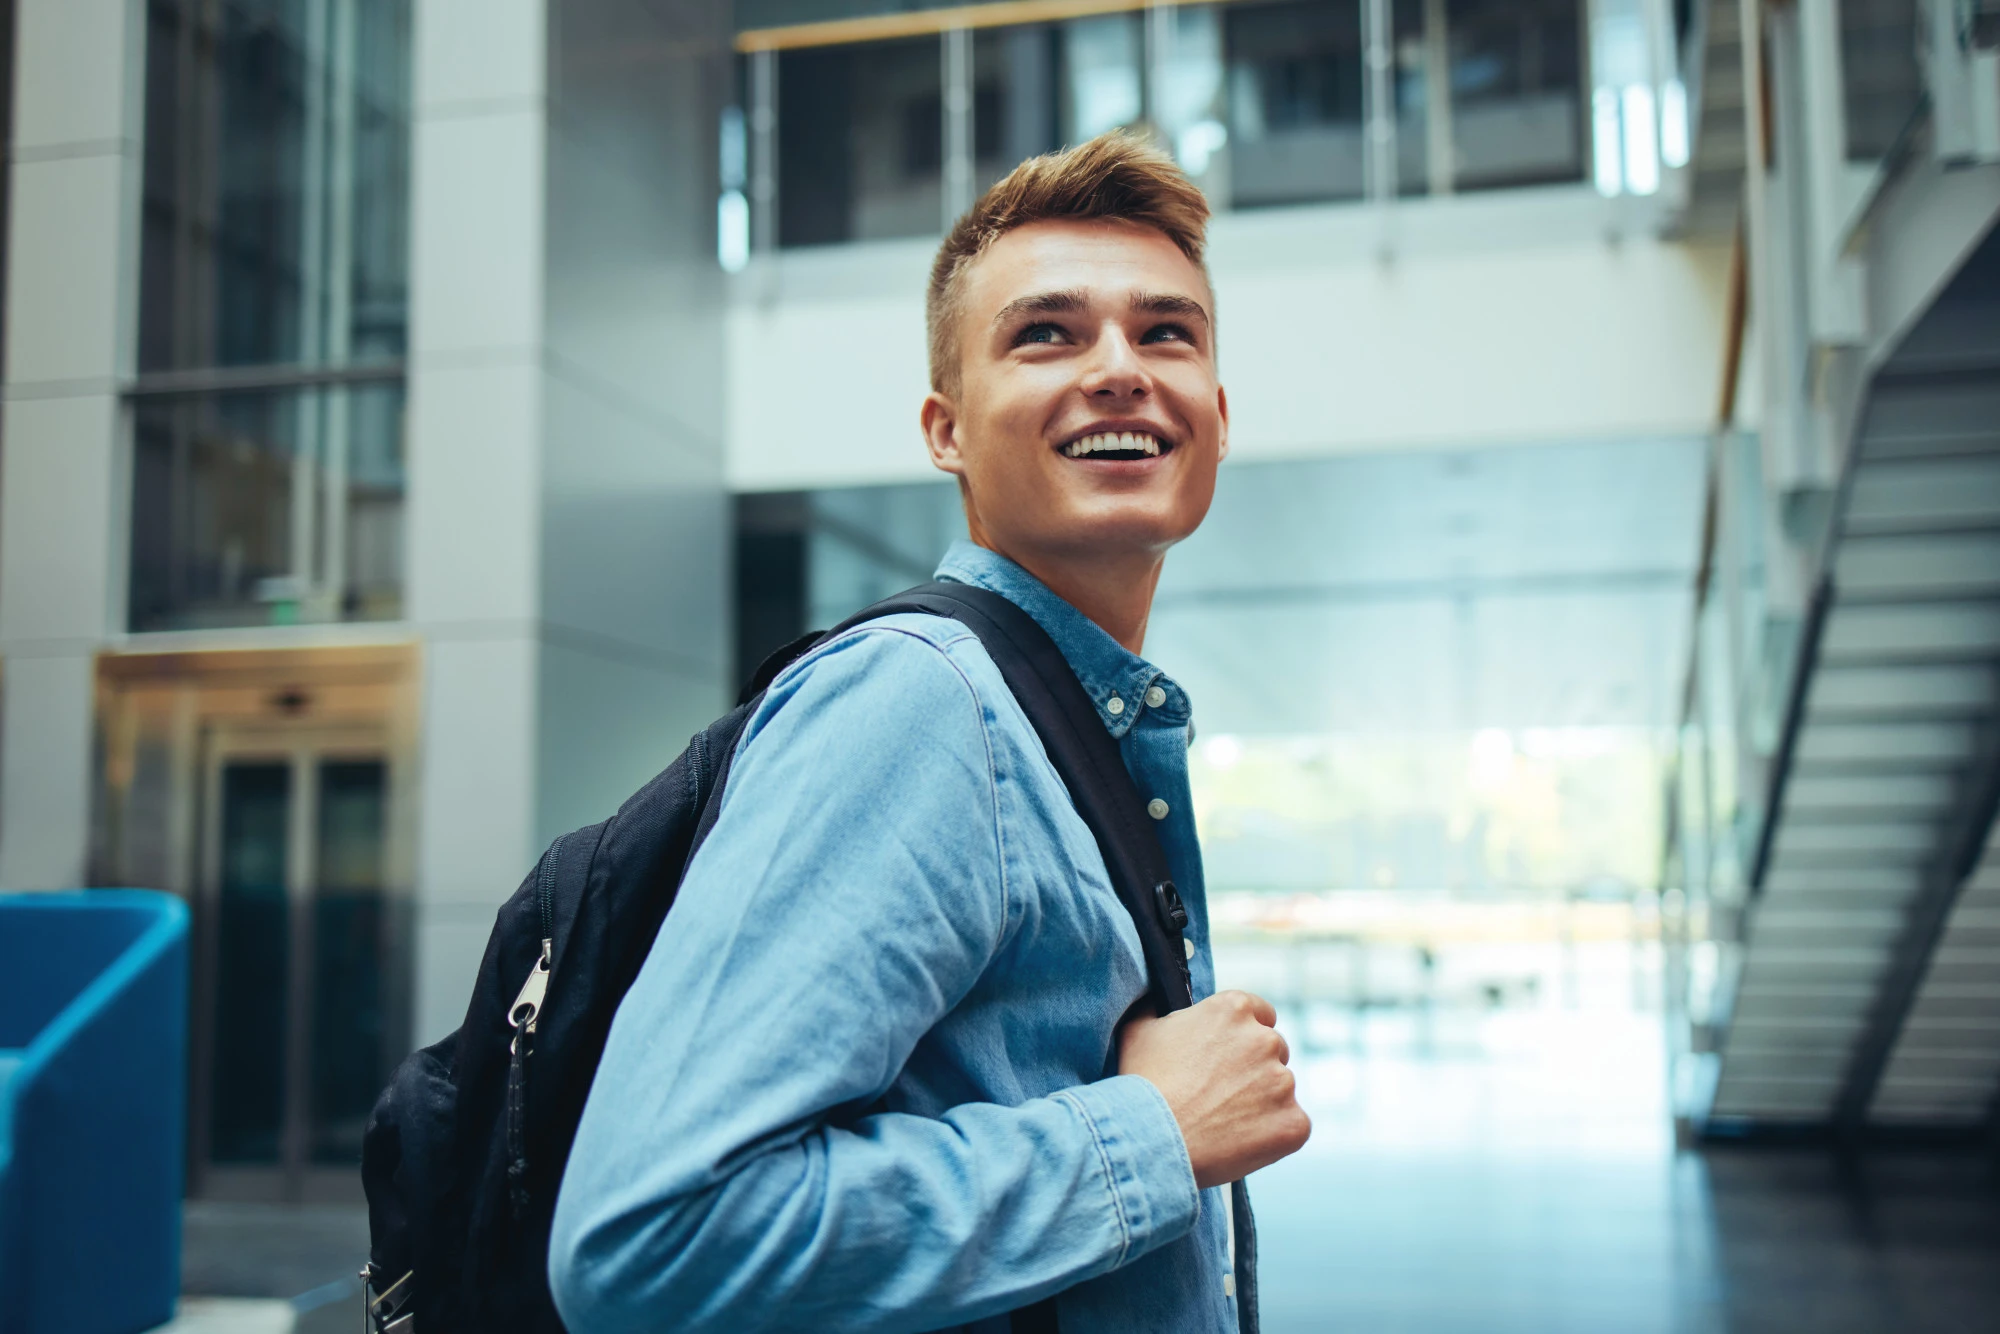 A smiling male student with a backpack looking over his shoulder